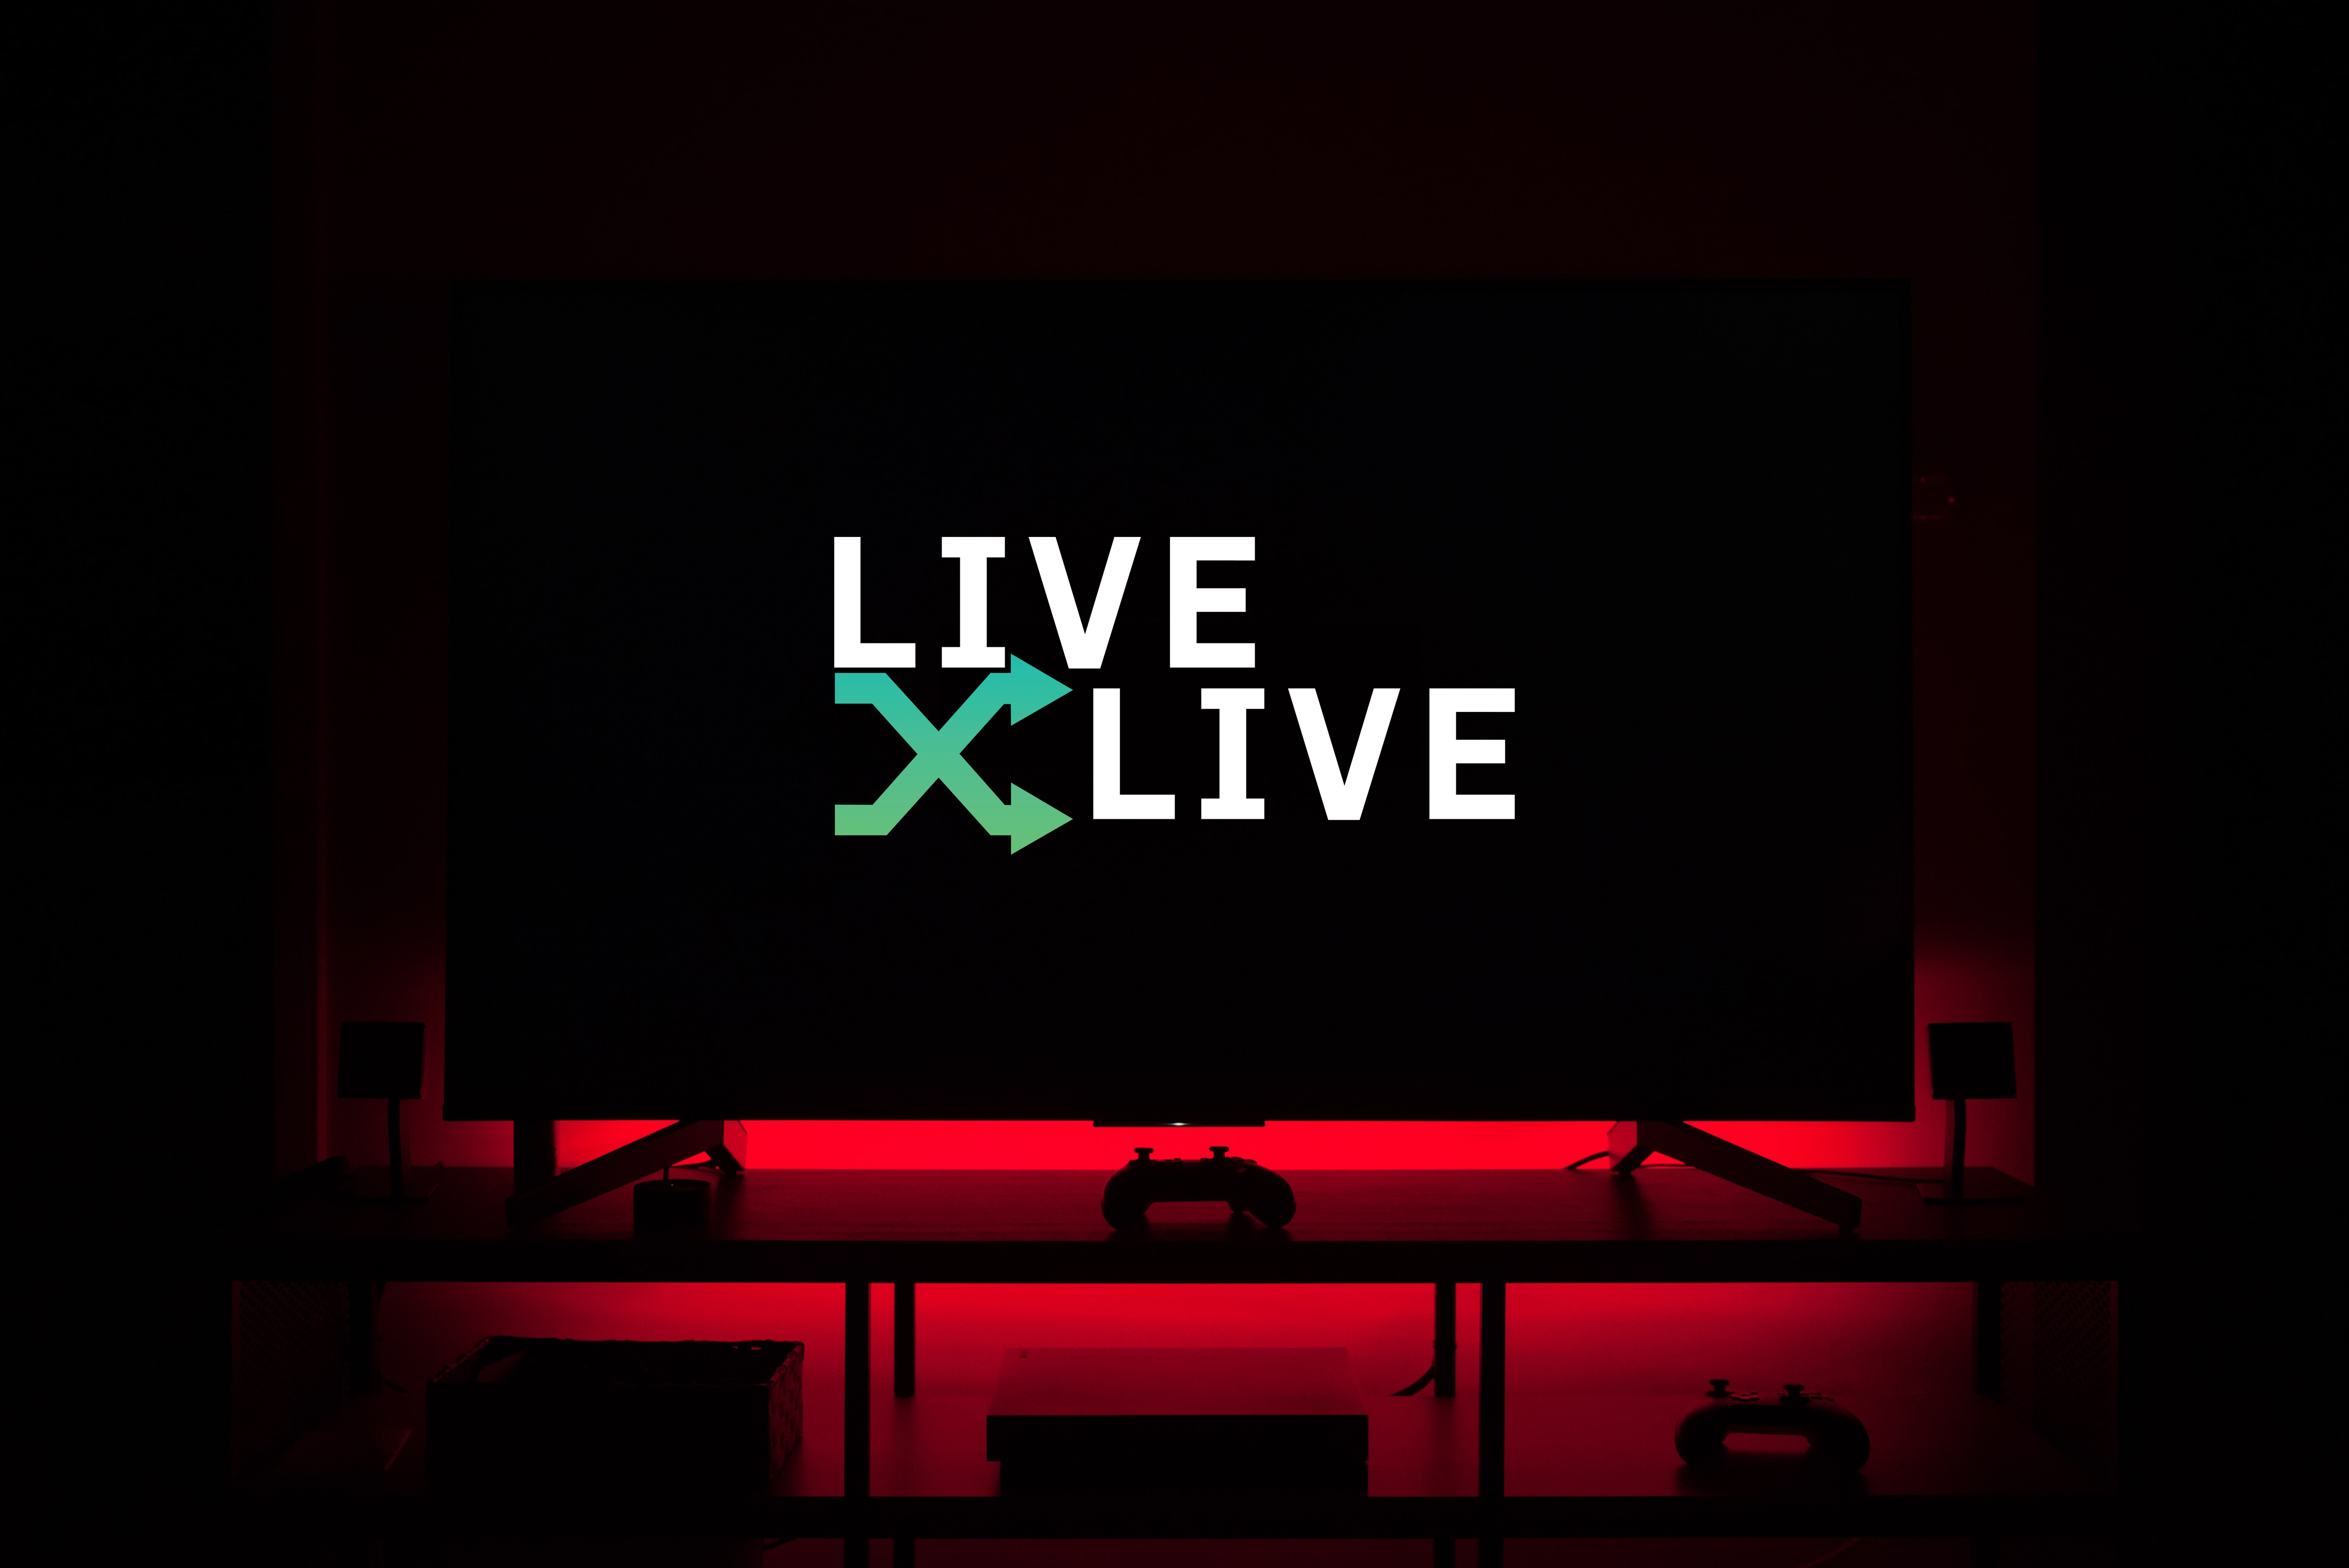 LiveXLive launch their new audio, video, podcast and live streaming app to smart TVs